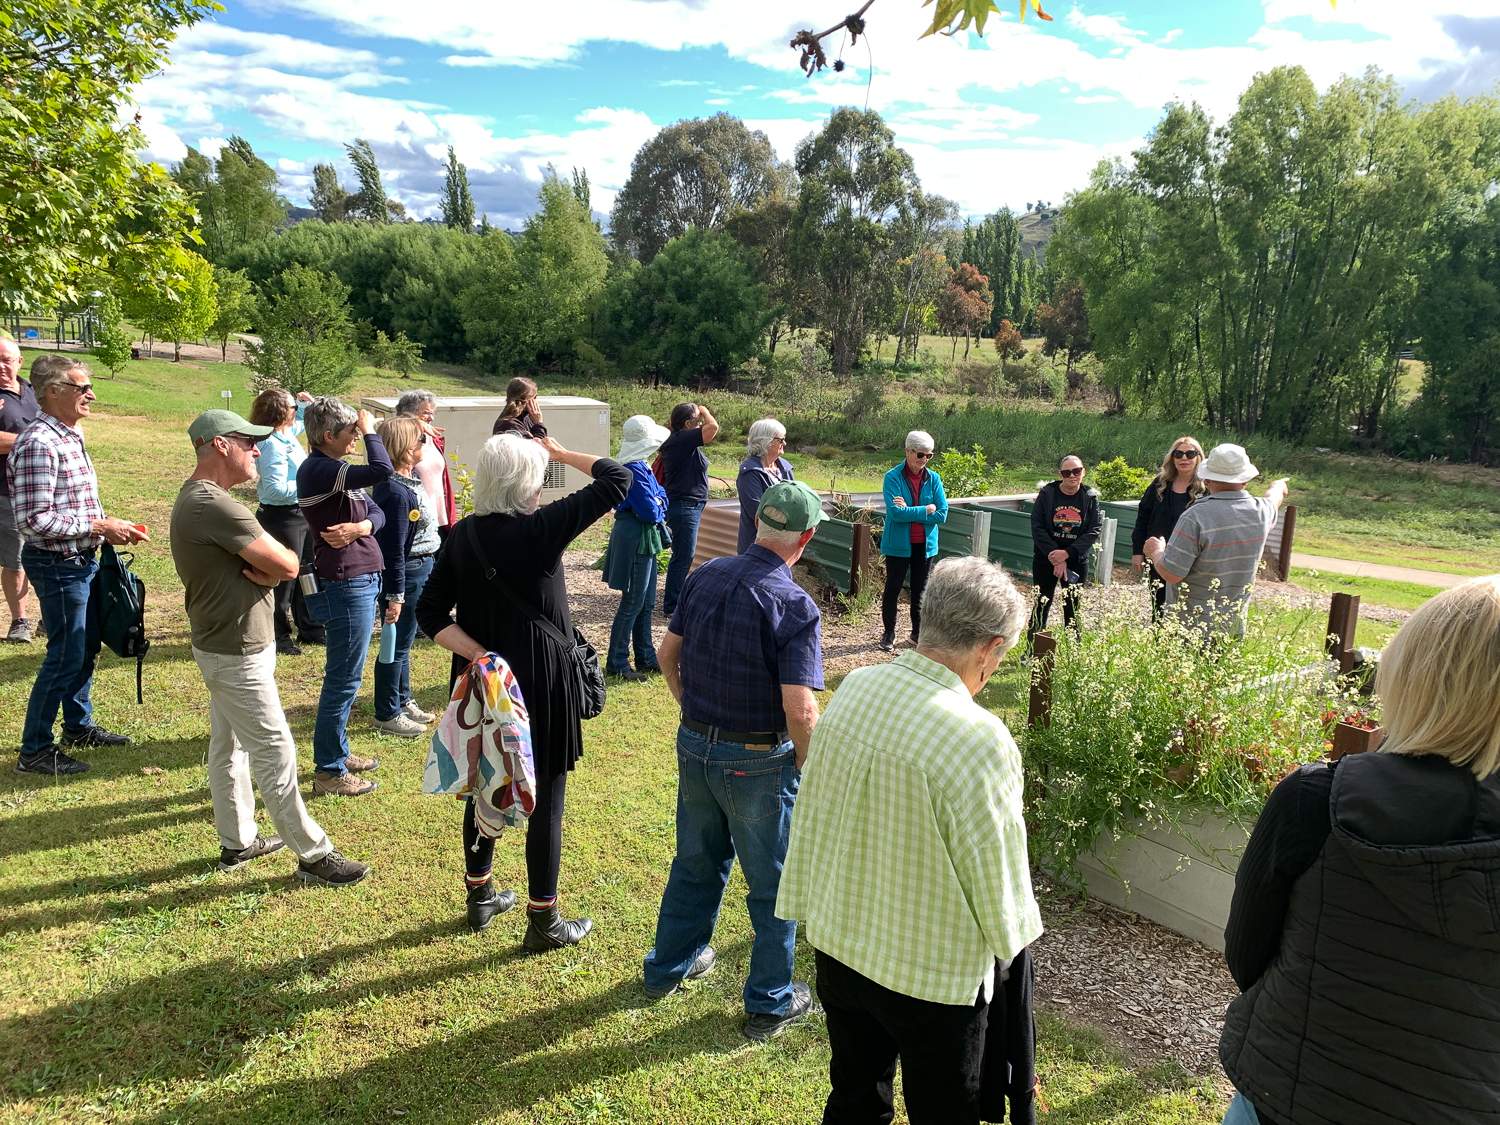 A group of people standing in sunshine in a community garden and looking towards the nearby creek.